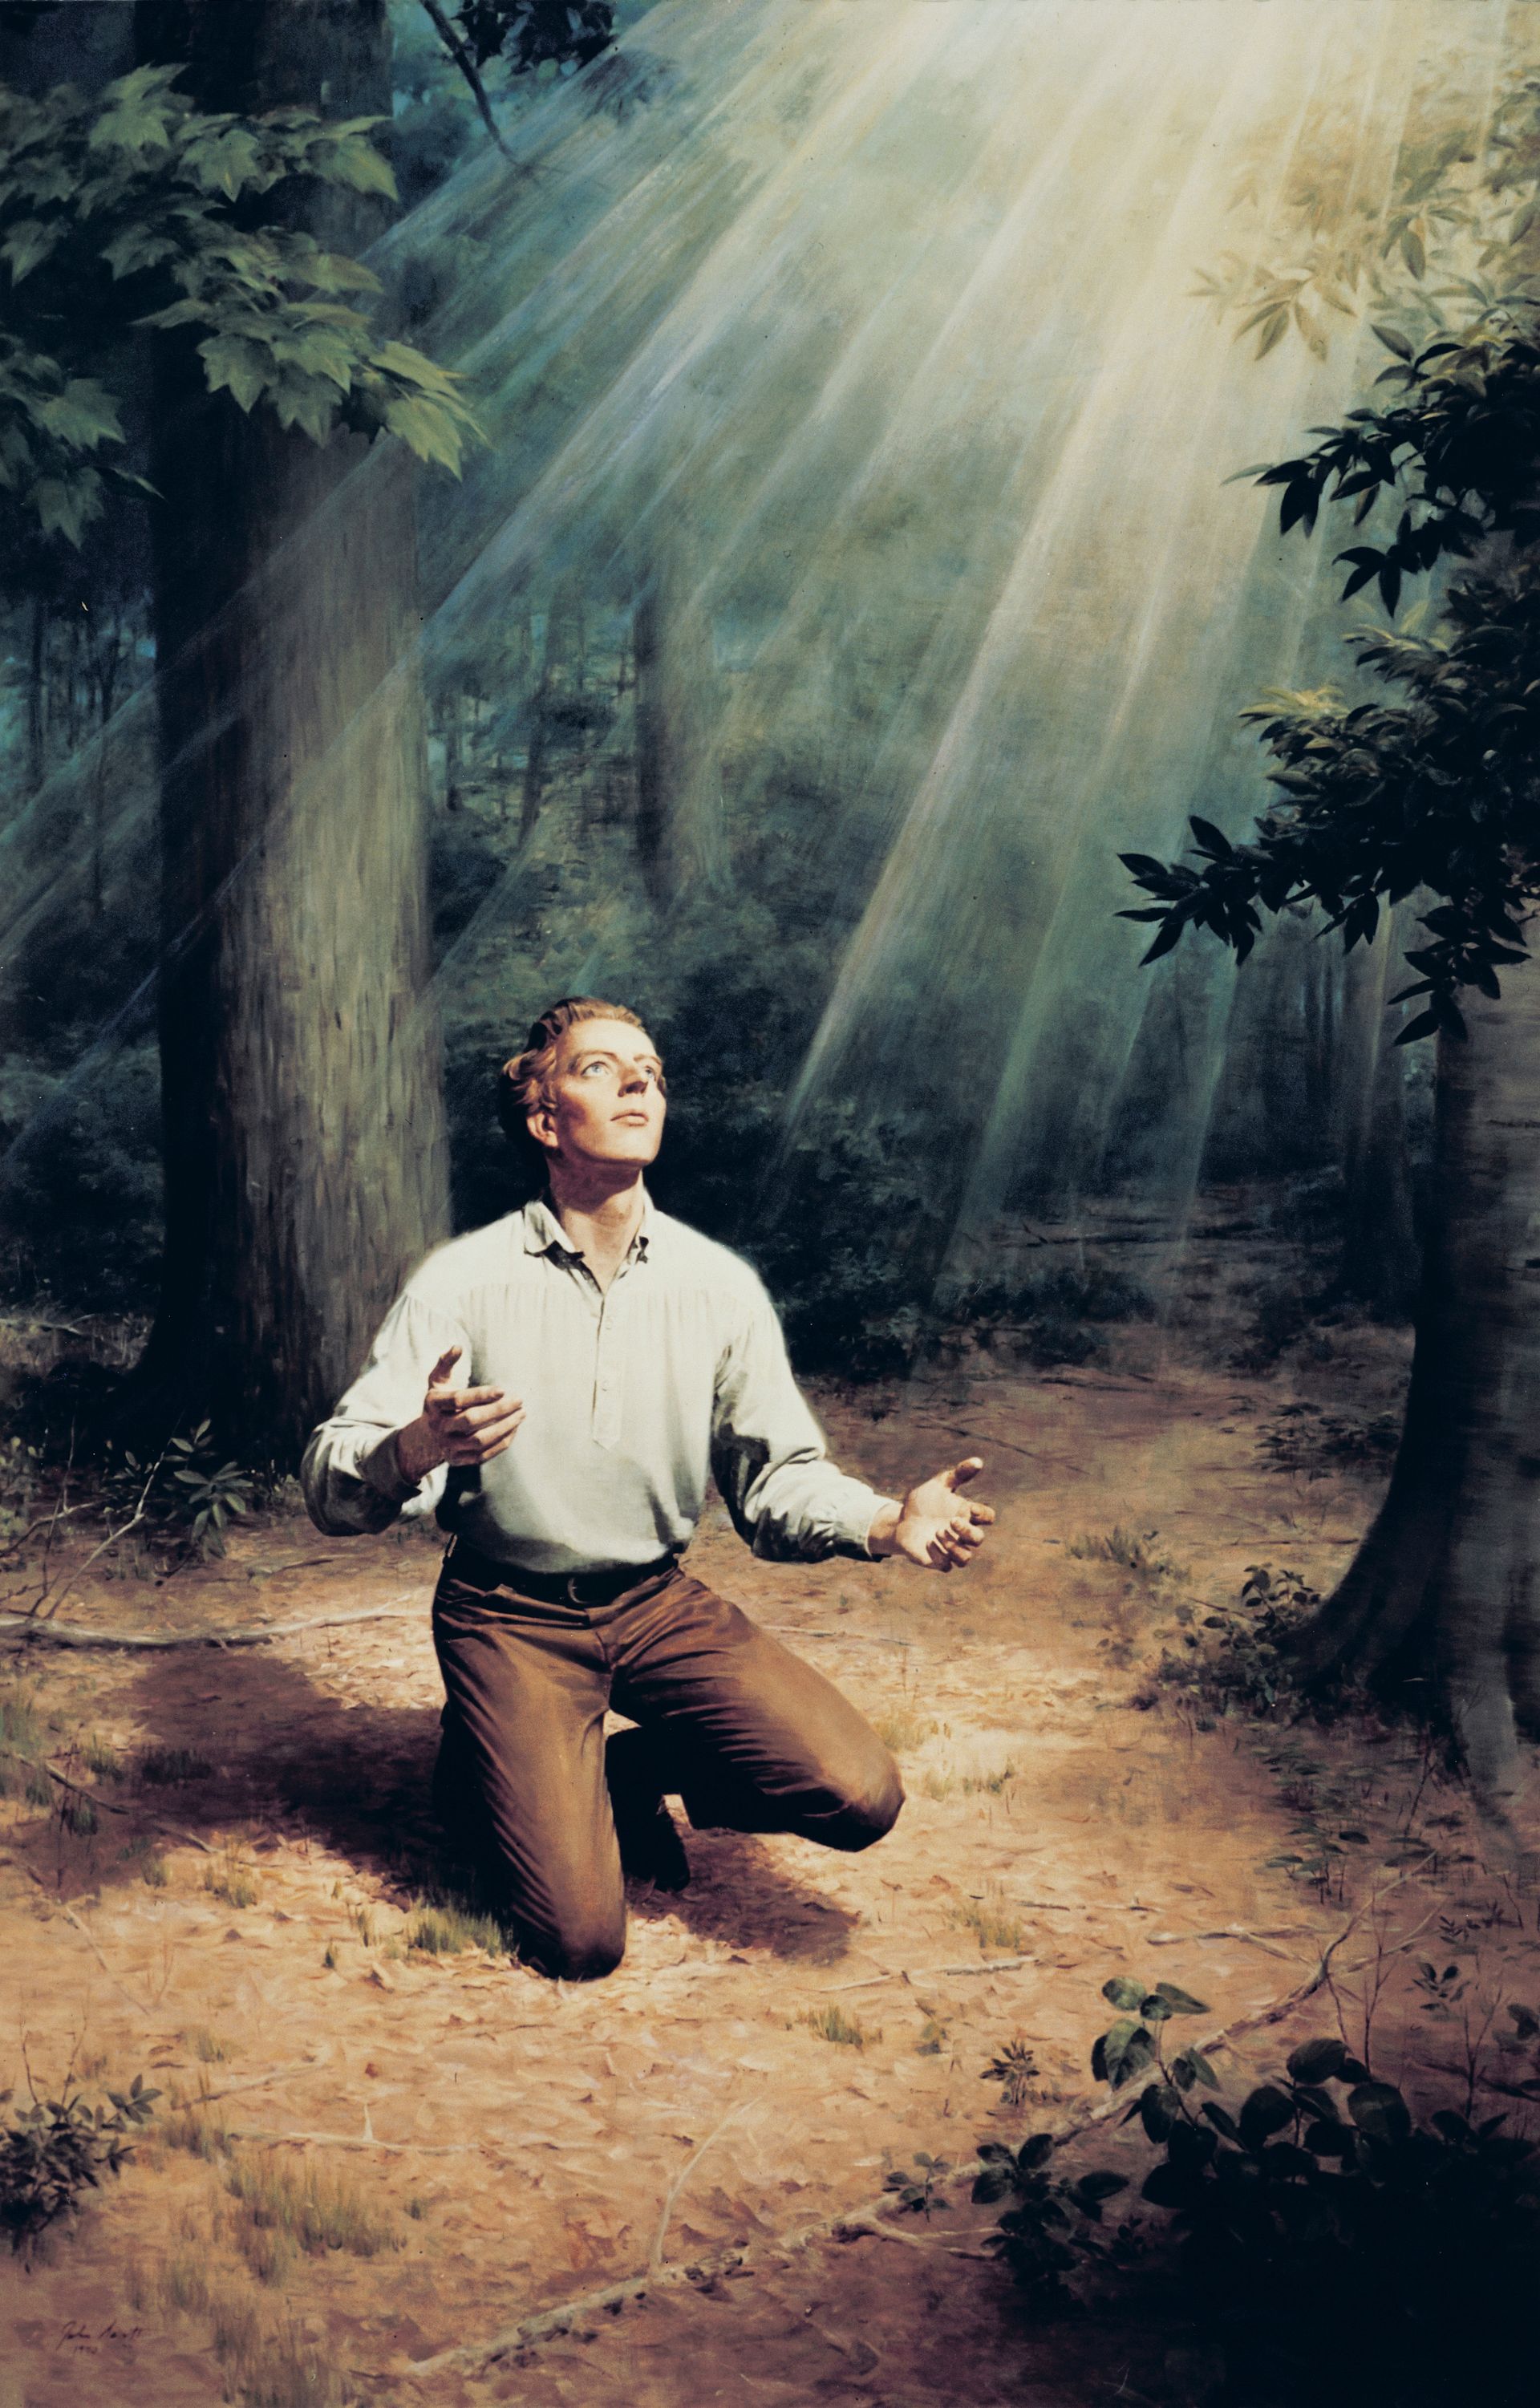 A painting by John Scott showing Joseph Smith praying in the Sacred Grove.